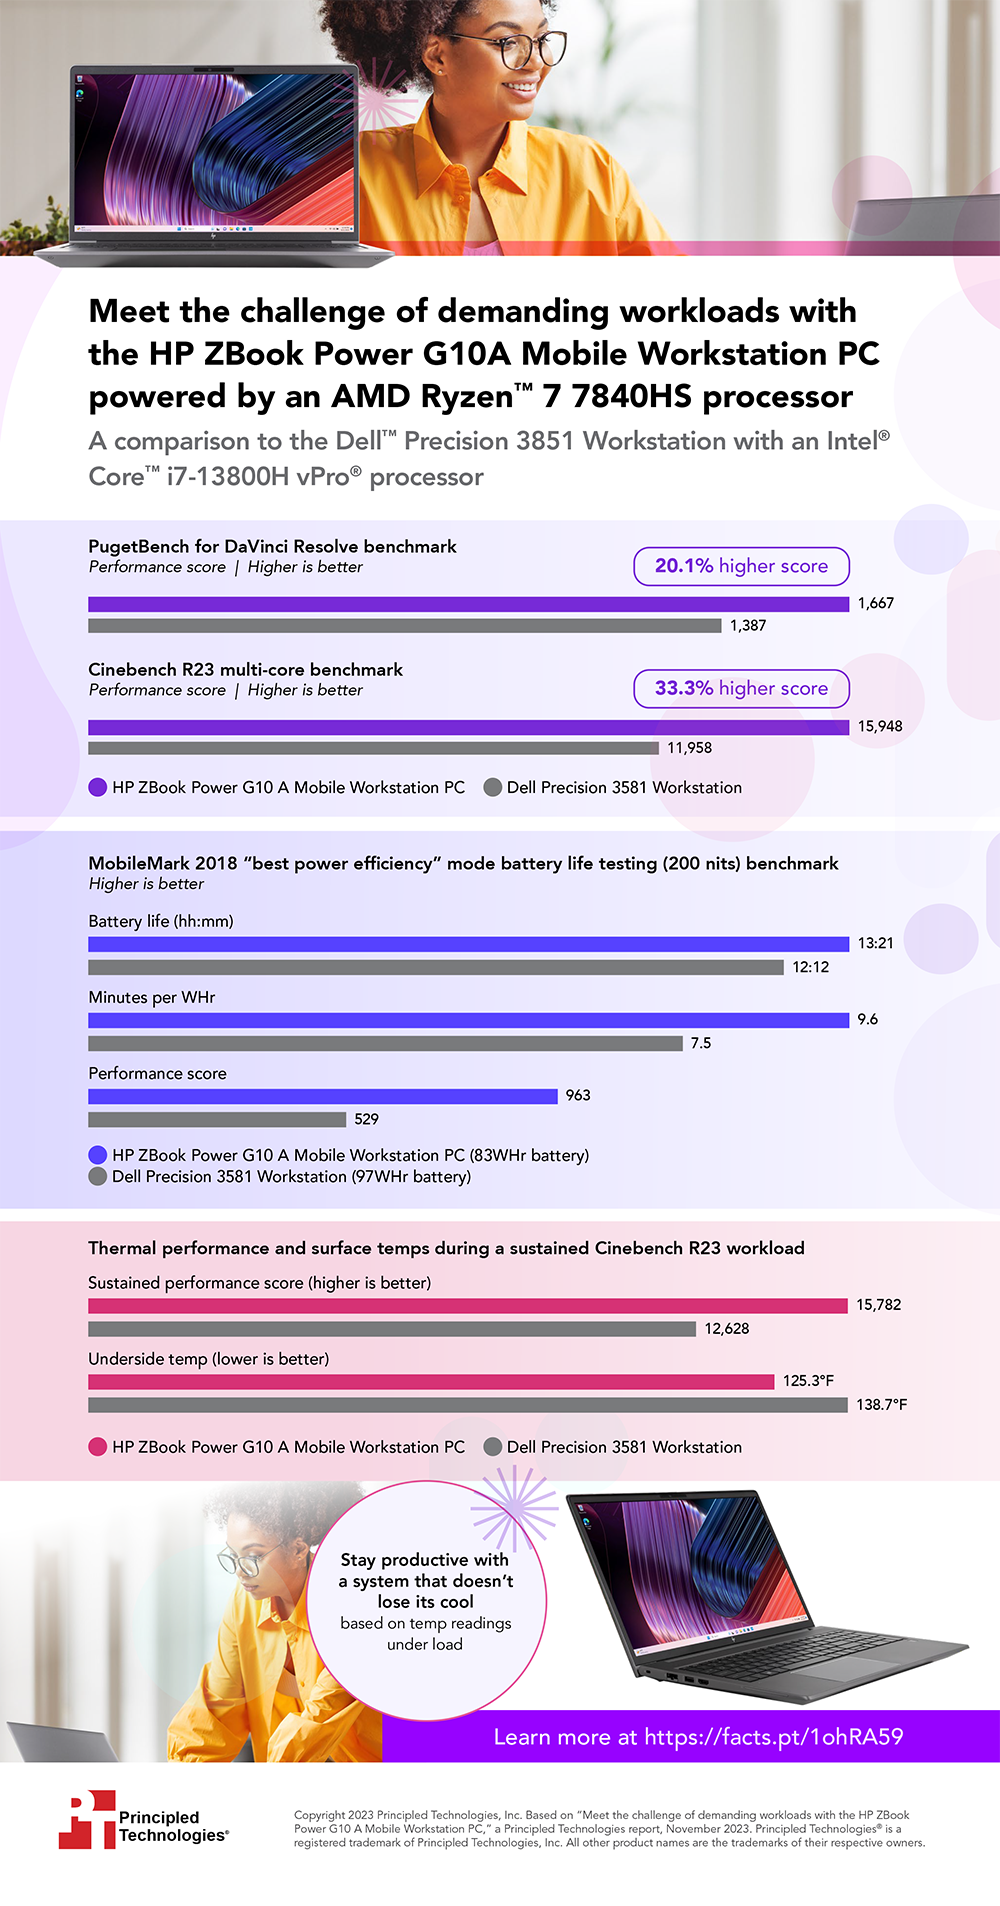  Meet the challenge of demanding workloads with the HP ZBook Power G10A Mobile Workstation PC powered by an AMD Ryzen 7 7840HS processor – Infographic